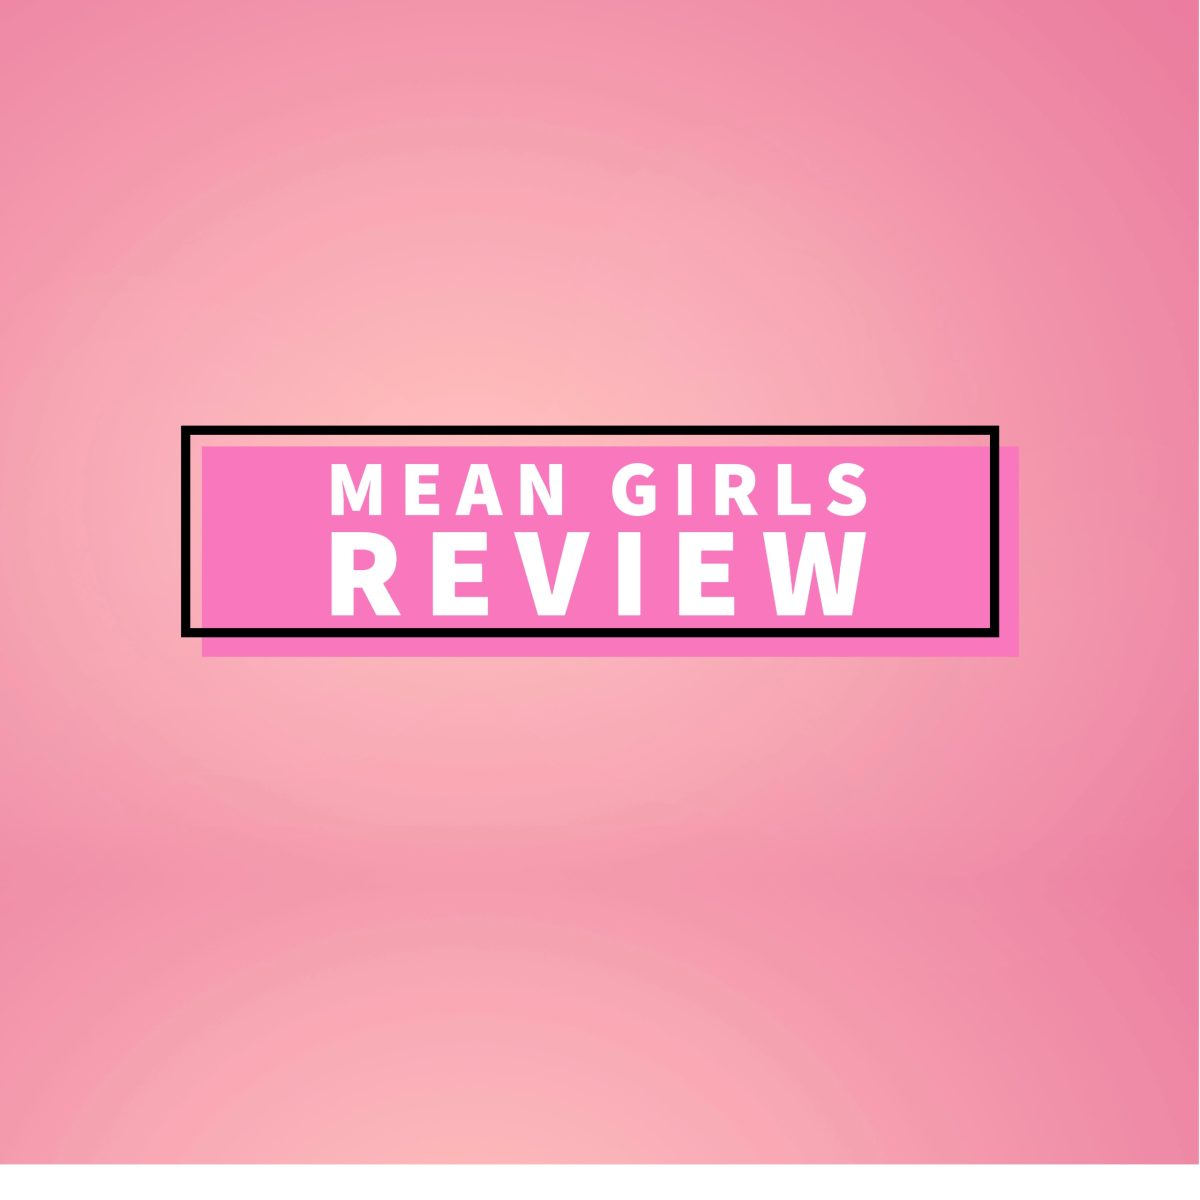 The Mean Girls movie has brought in $84.3 million to the box office.